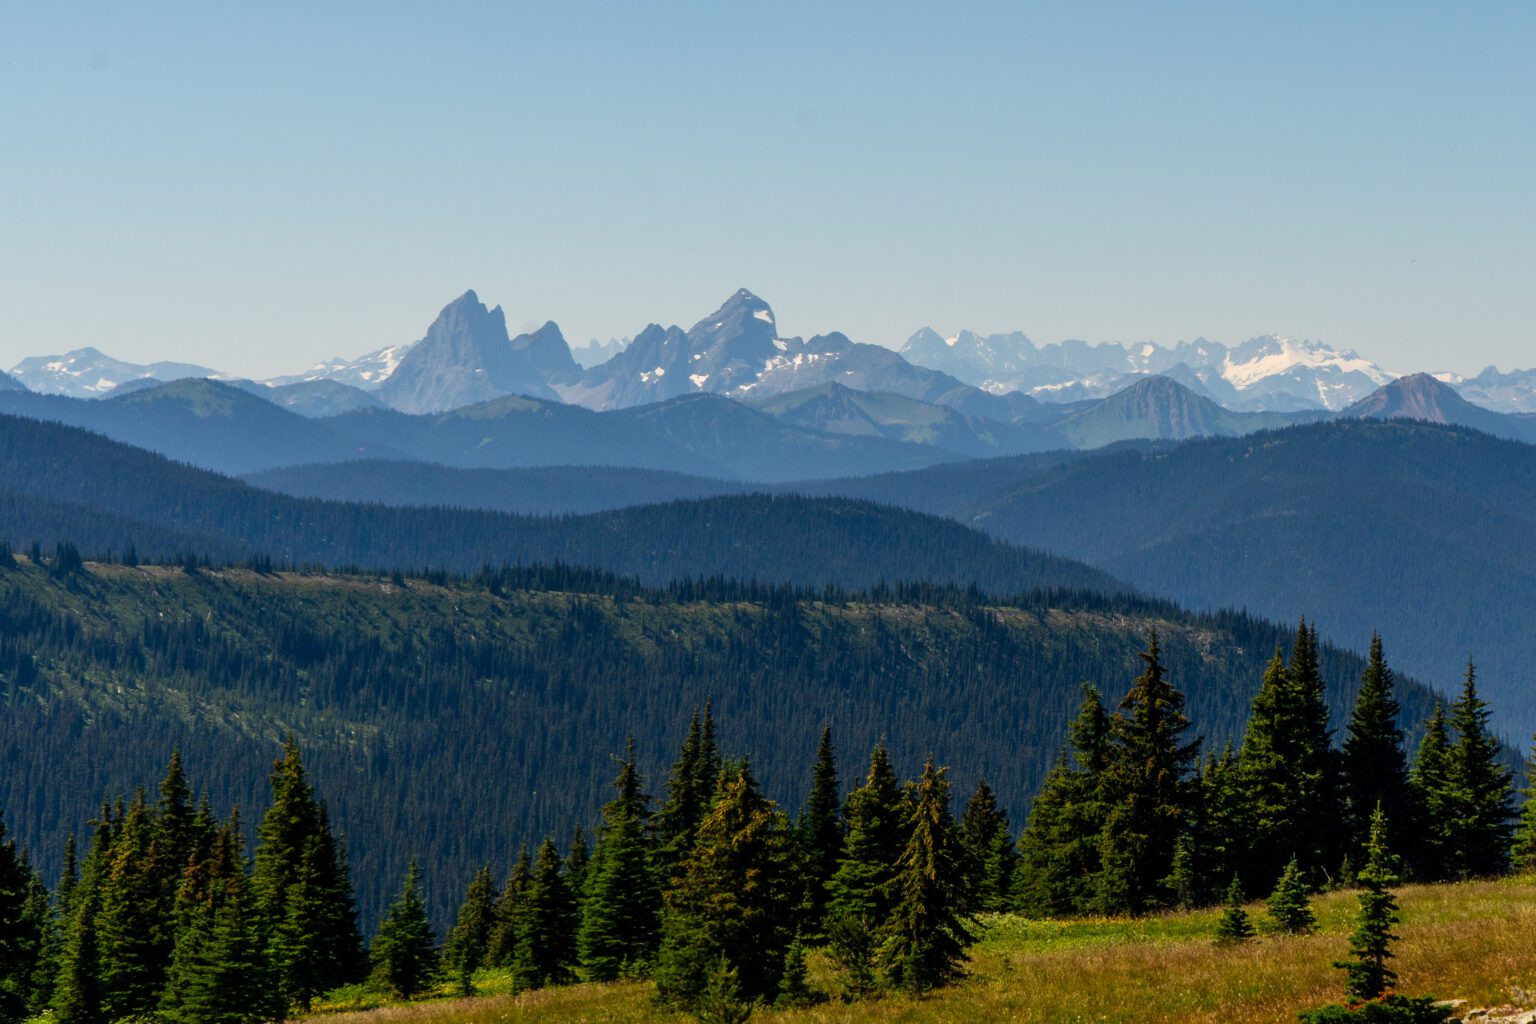 The 13-mile Heather Trail offers views of craggy peaks of the Canadian Cascades from Manning Provincial Park on Aug. 17.